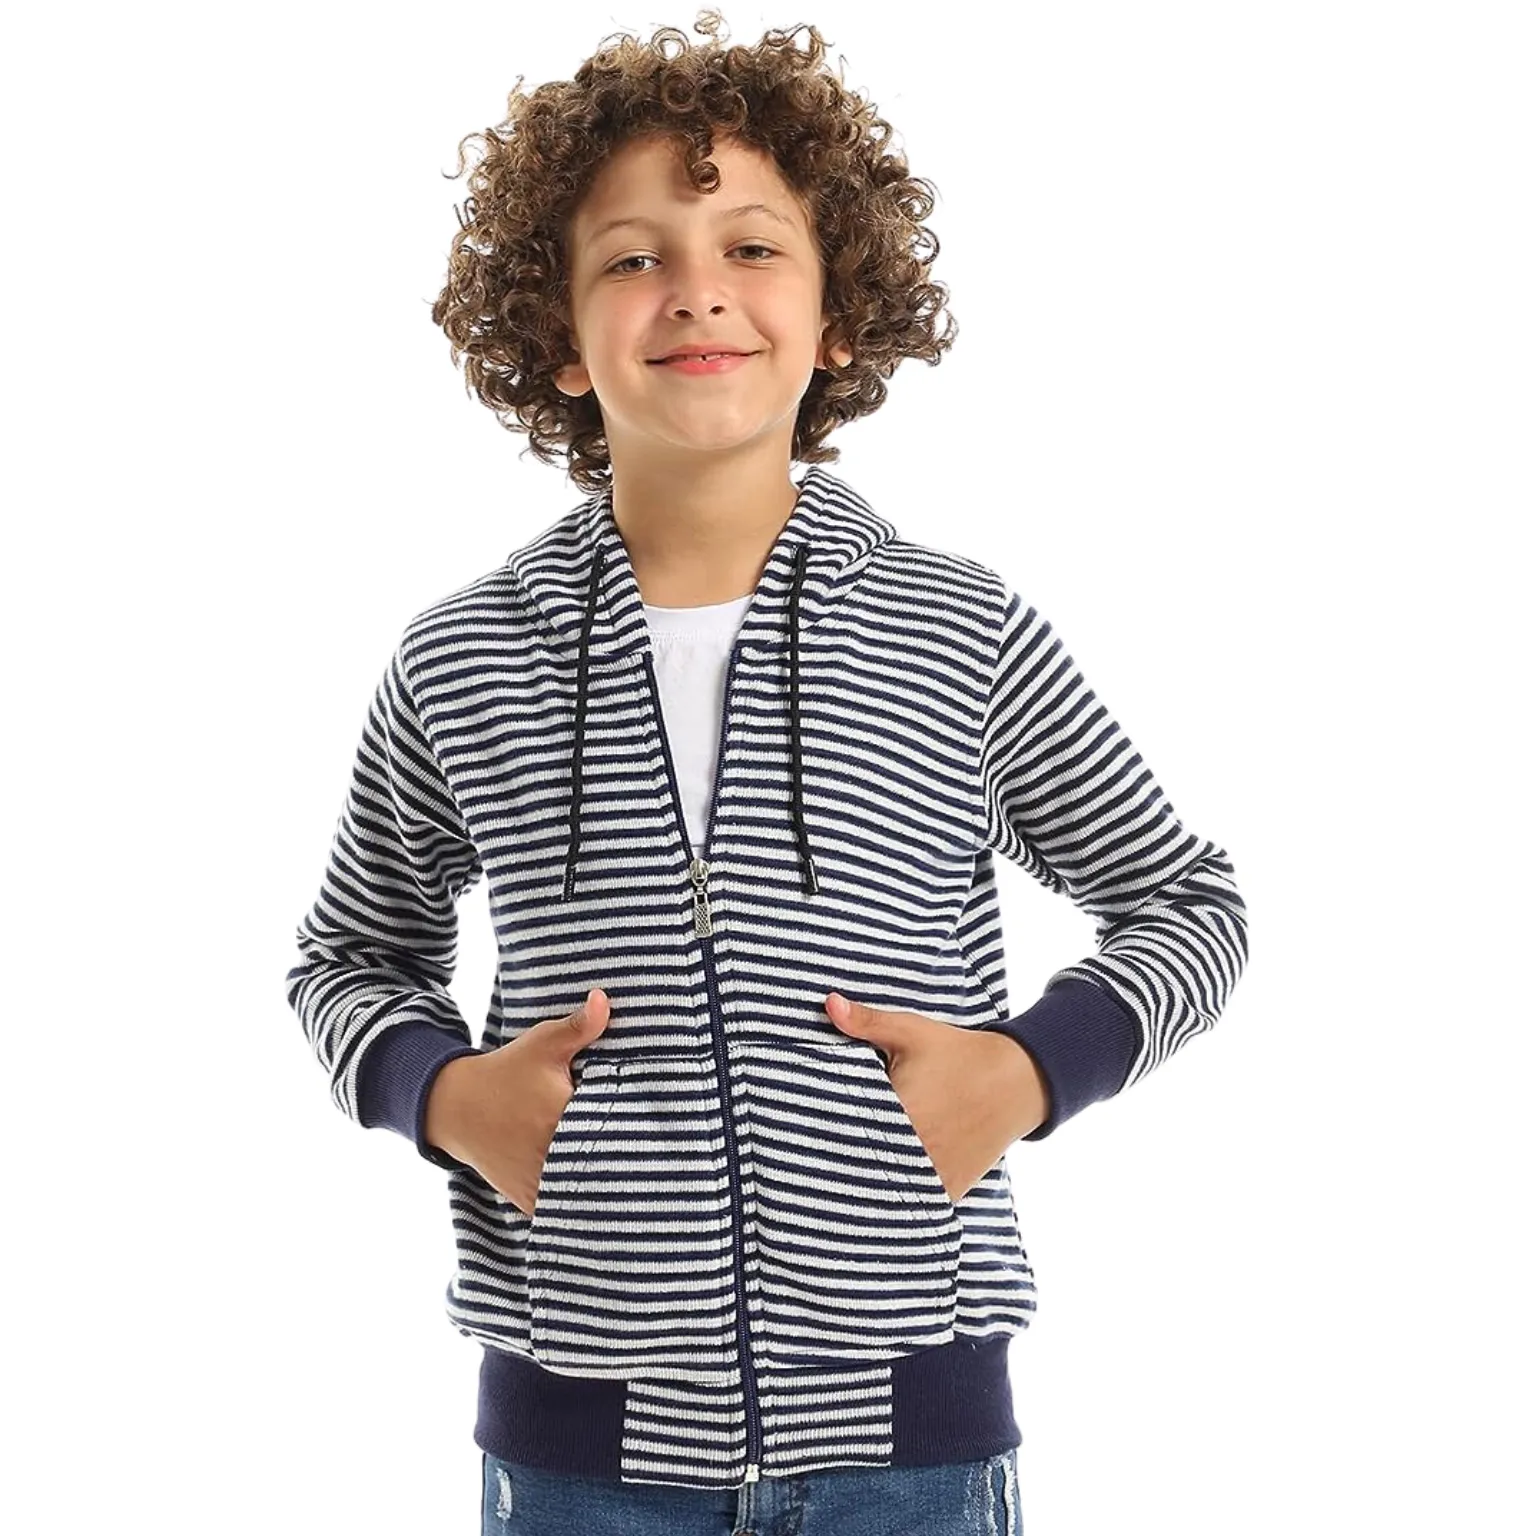 Kids Striped Jacket manufacturing with trendy designs